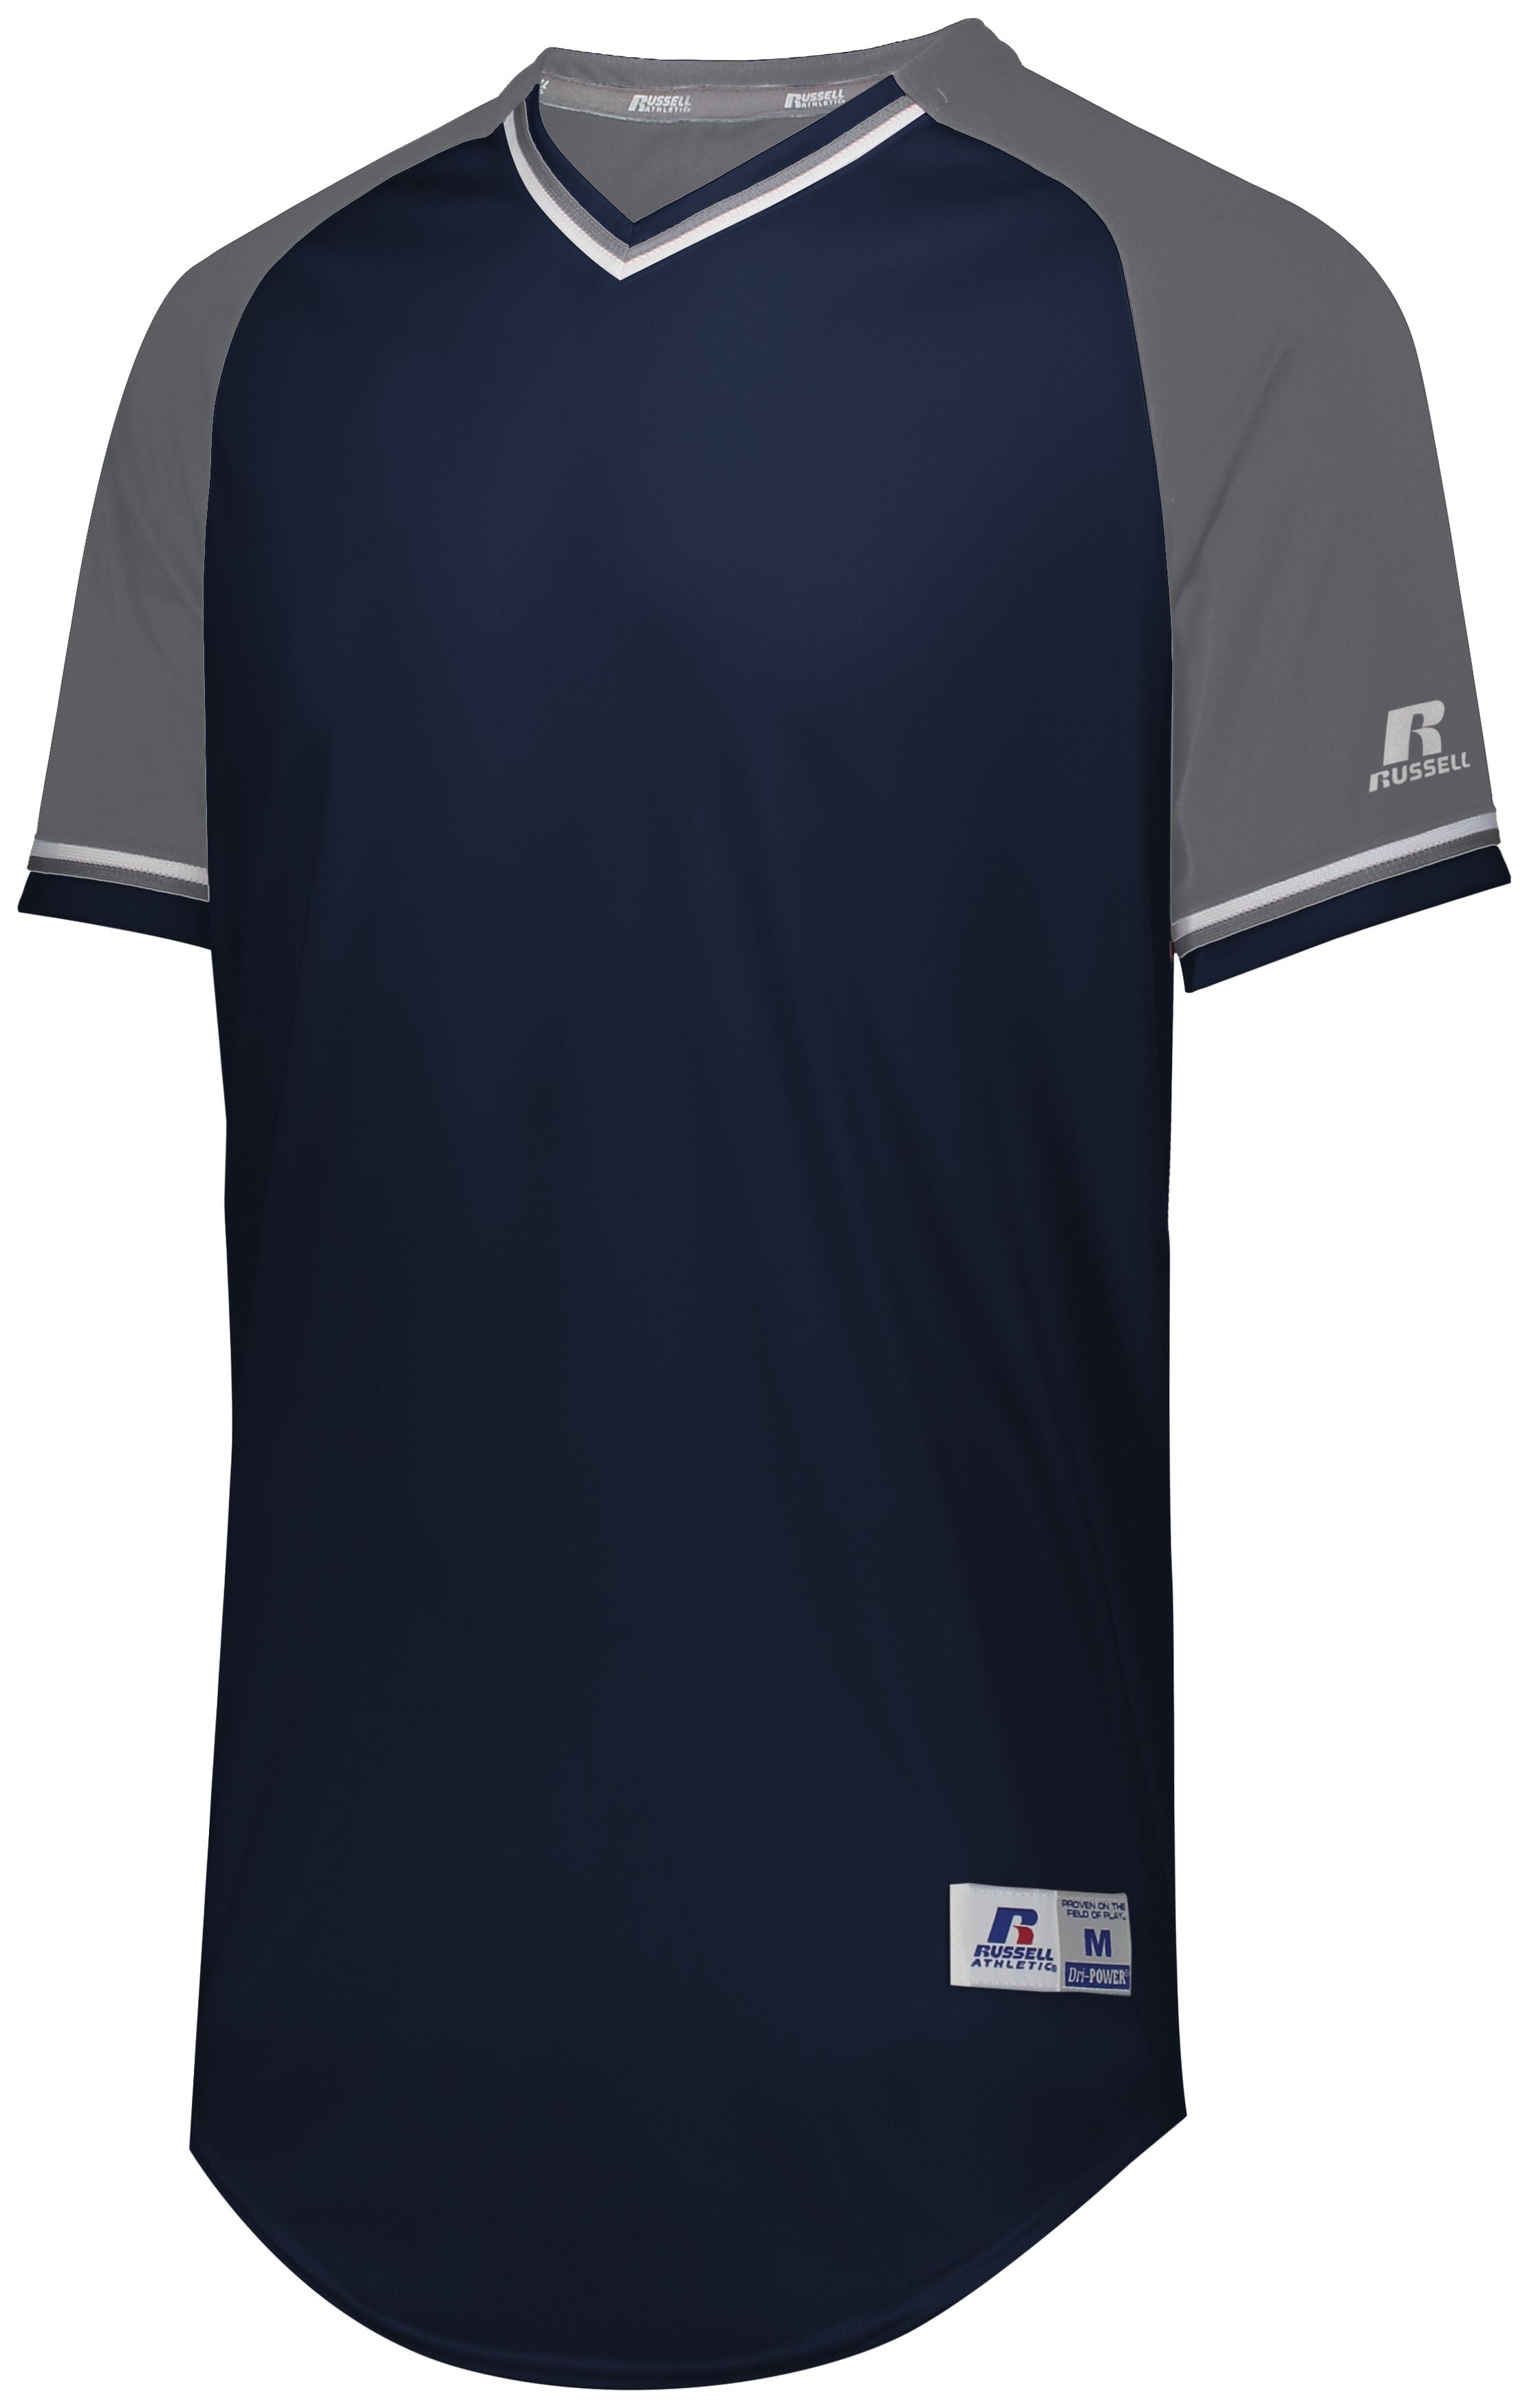 Russell Athletic Youth Classic V-Neck Jersey in Navy/Steel/White  -Part of the Youth, Youth-Jersey, Baseball, Russell-Athletic-Products, Shirts, All-Sports, All-Sports-1 product lines at KanaleyCreations.com